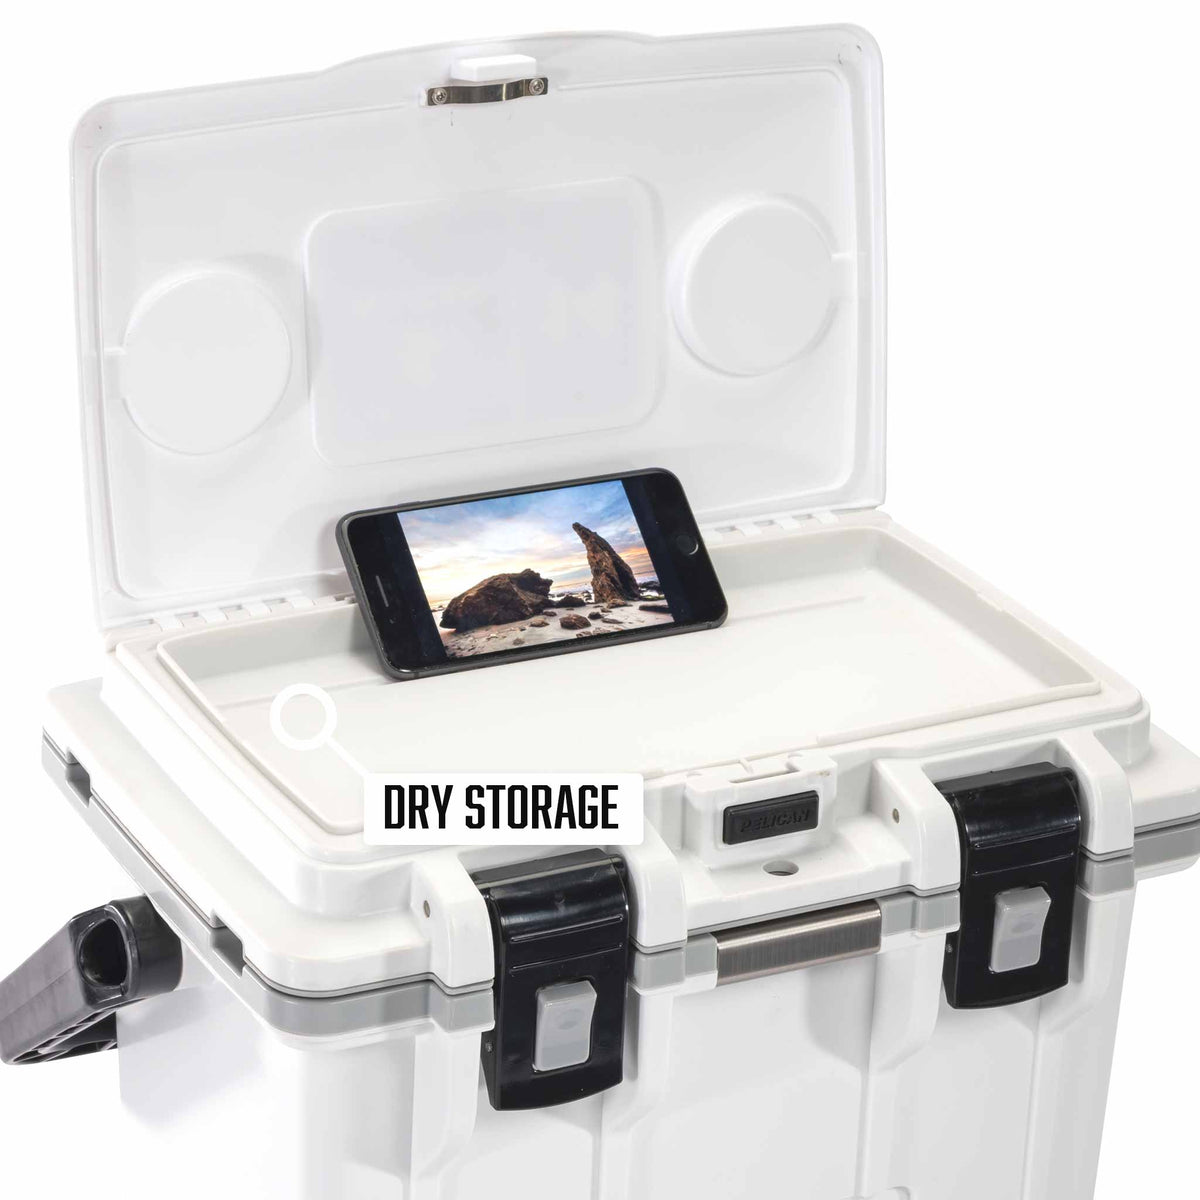 14QT Personal Pelican Cooler has a built in dry box and phone or tablet slot